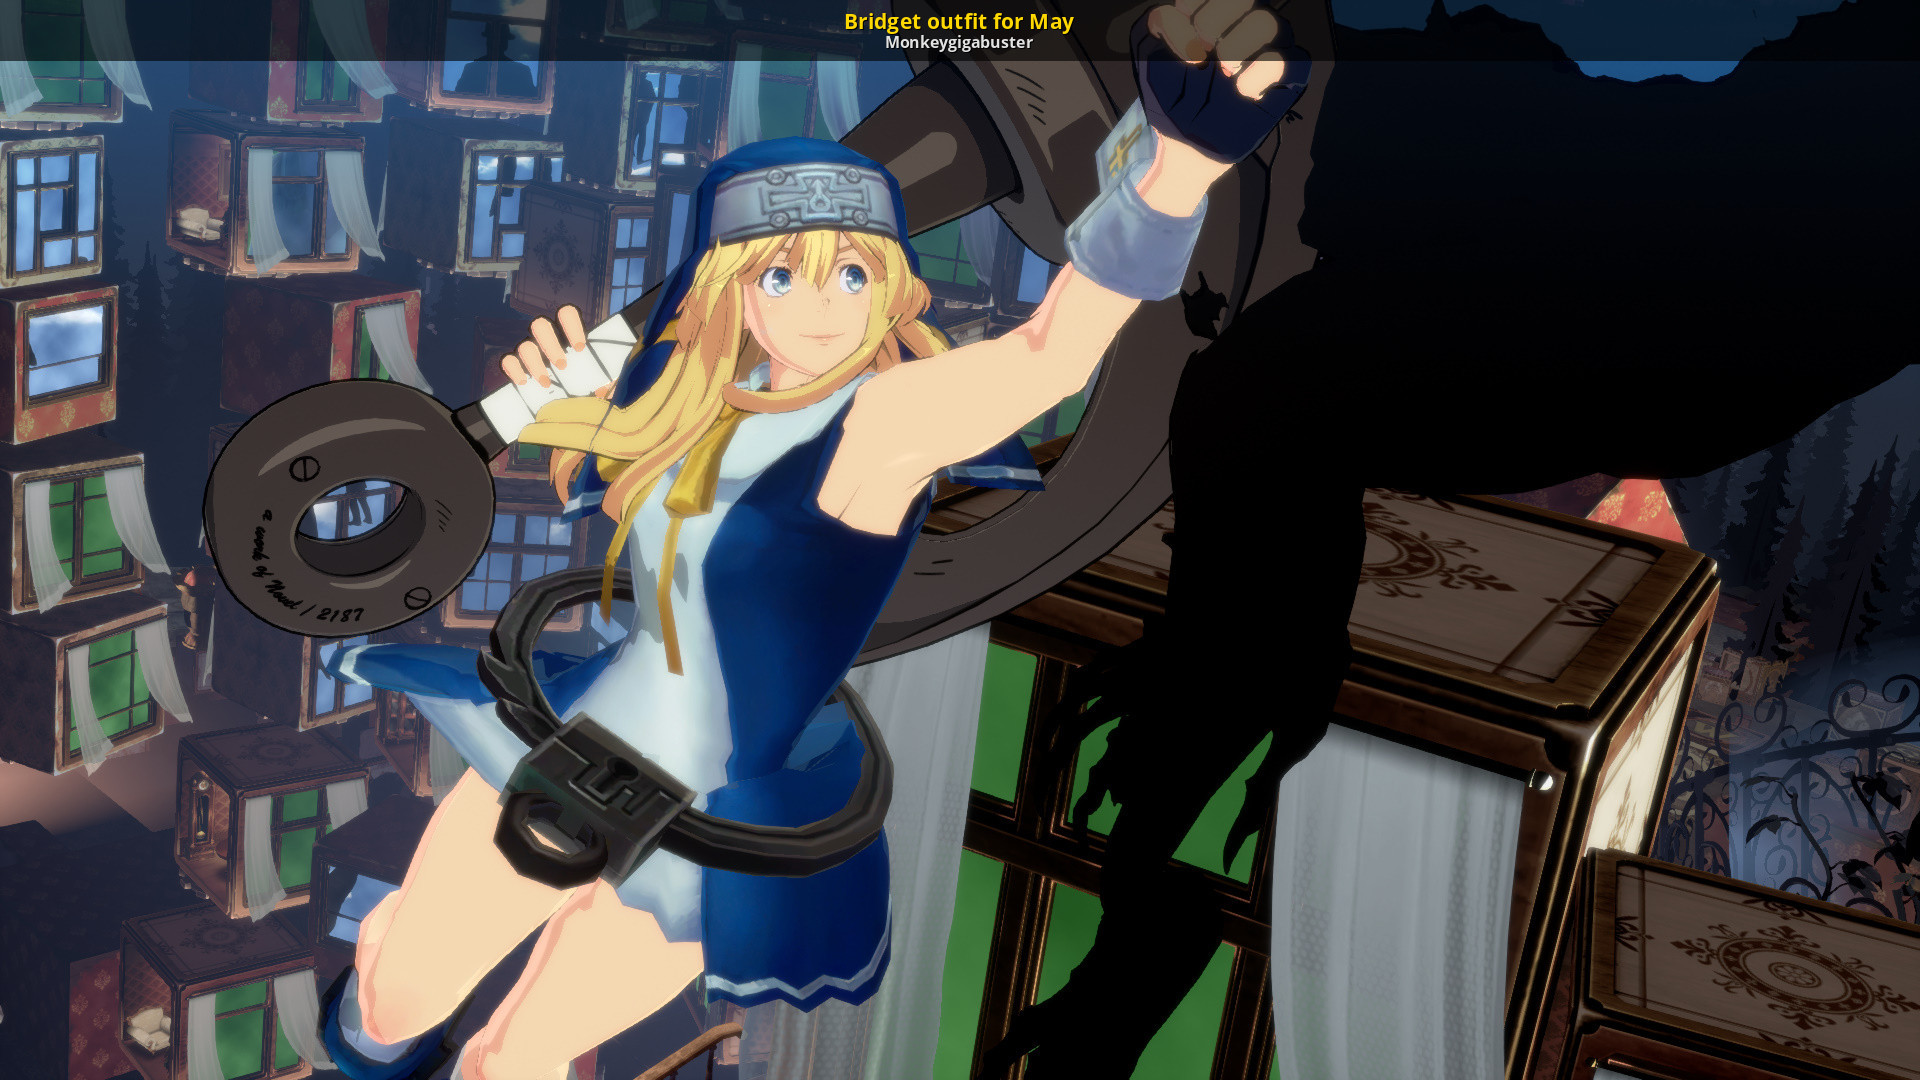 Moz Lunsford — Bridget Guilty Gear just bought her new outfit